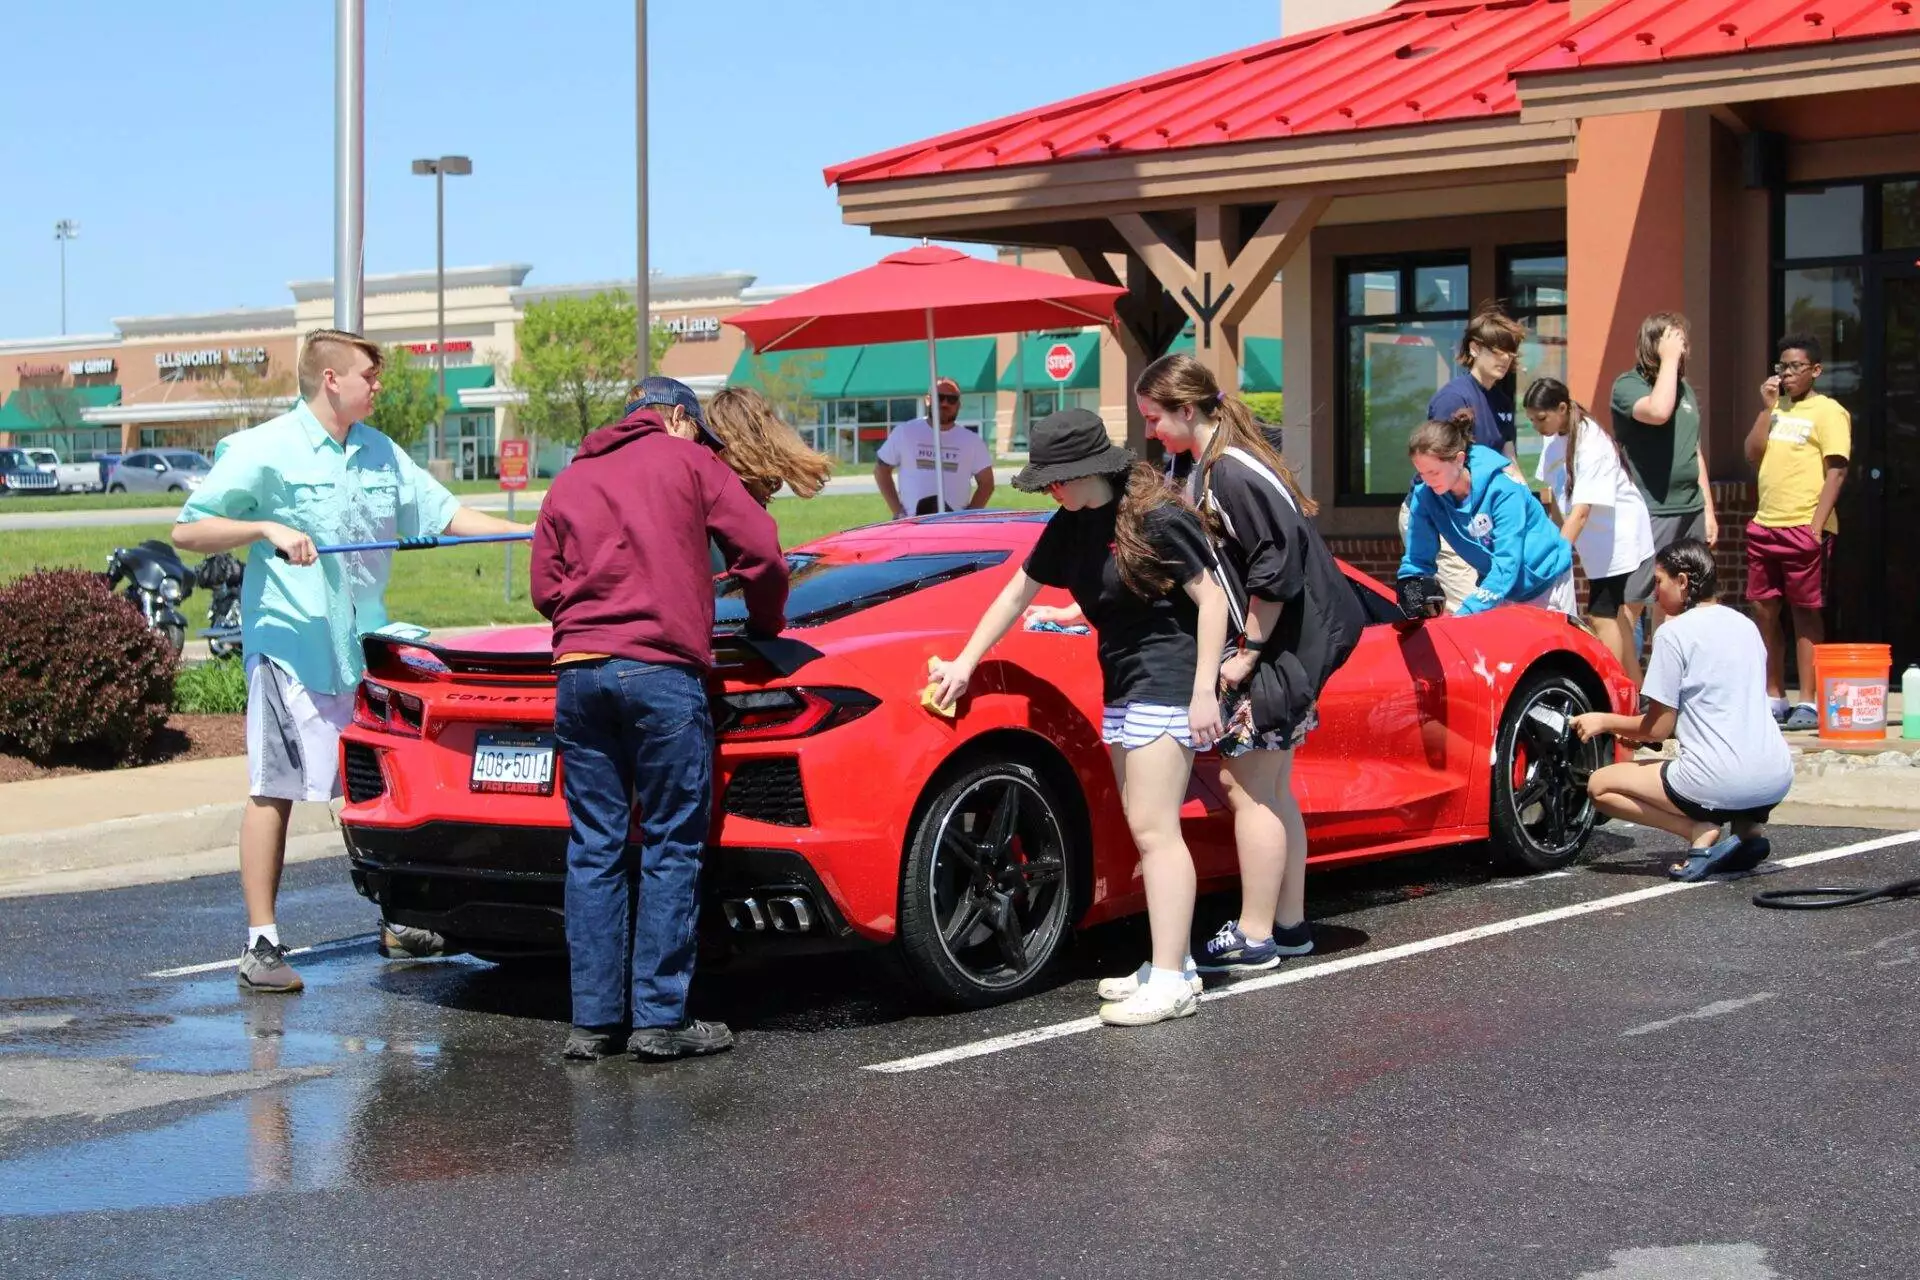 Group of people washing a red sports car in a sunny parking lot outside a building.